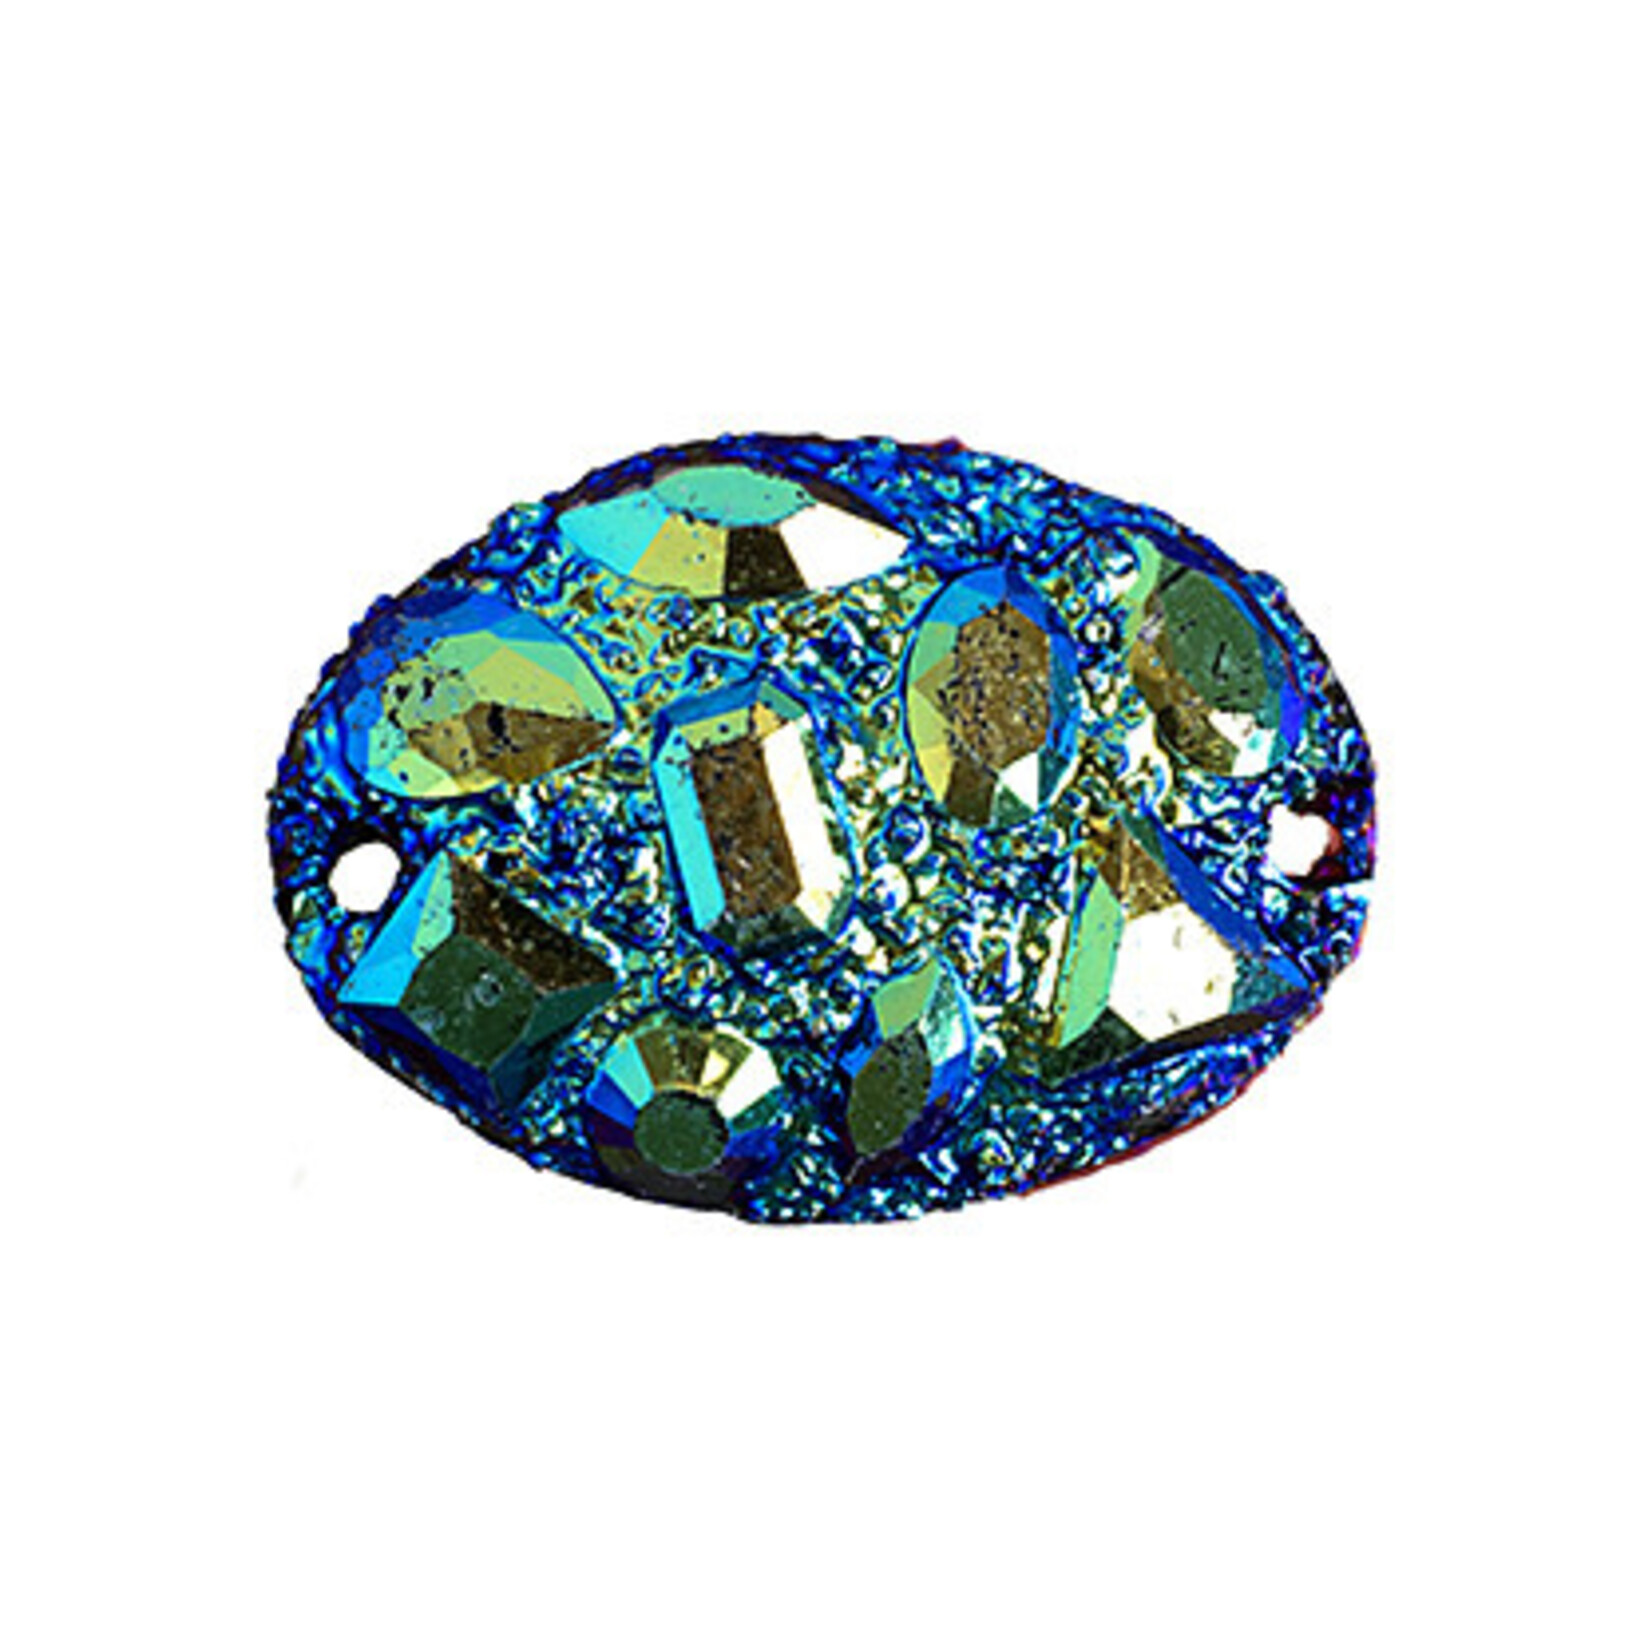 Moon Rock Resin Sew-On Stone 18 x 25 mm Oval (10 Pieces)